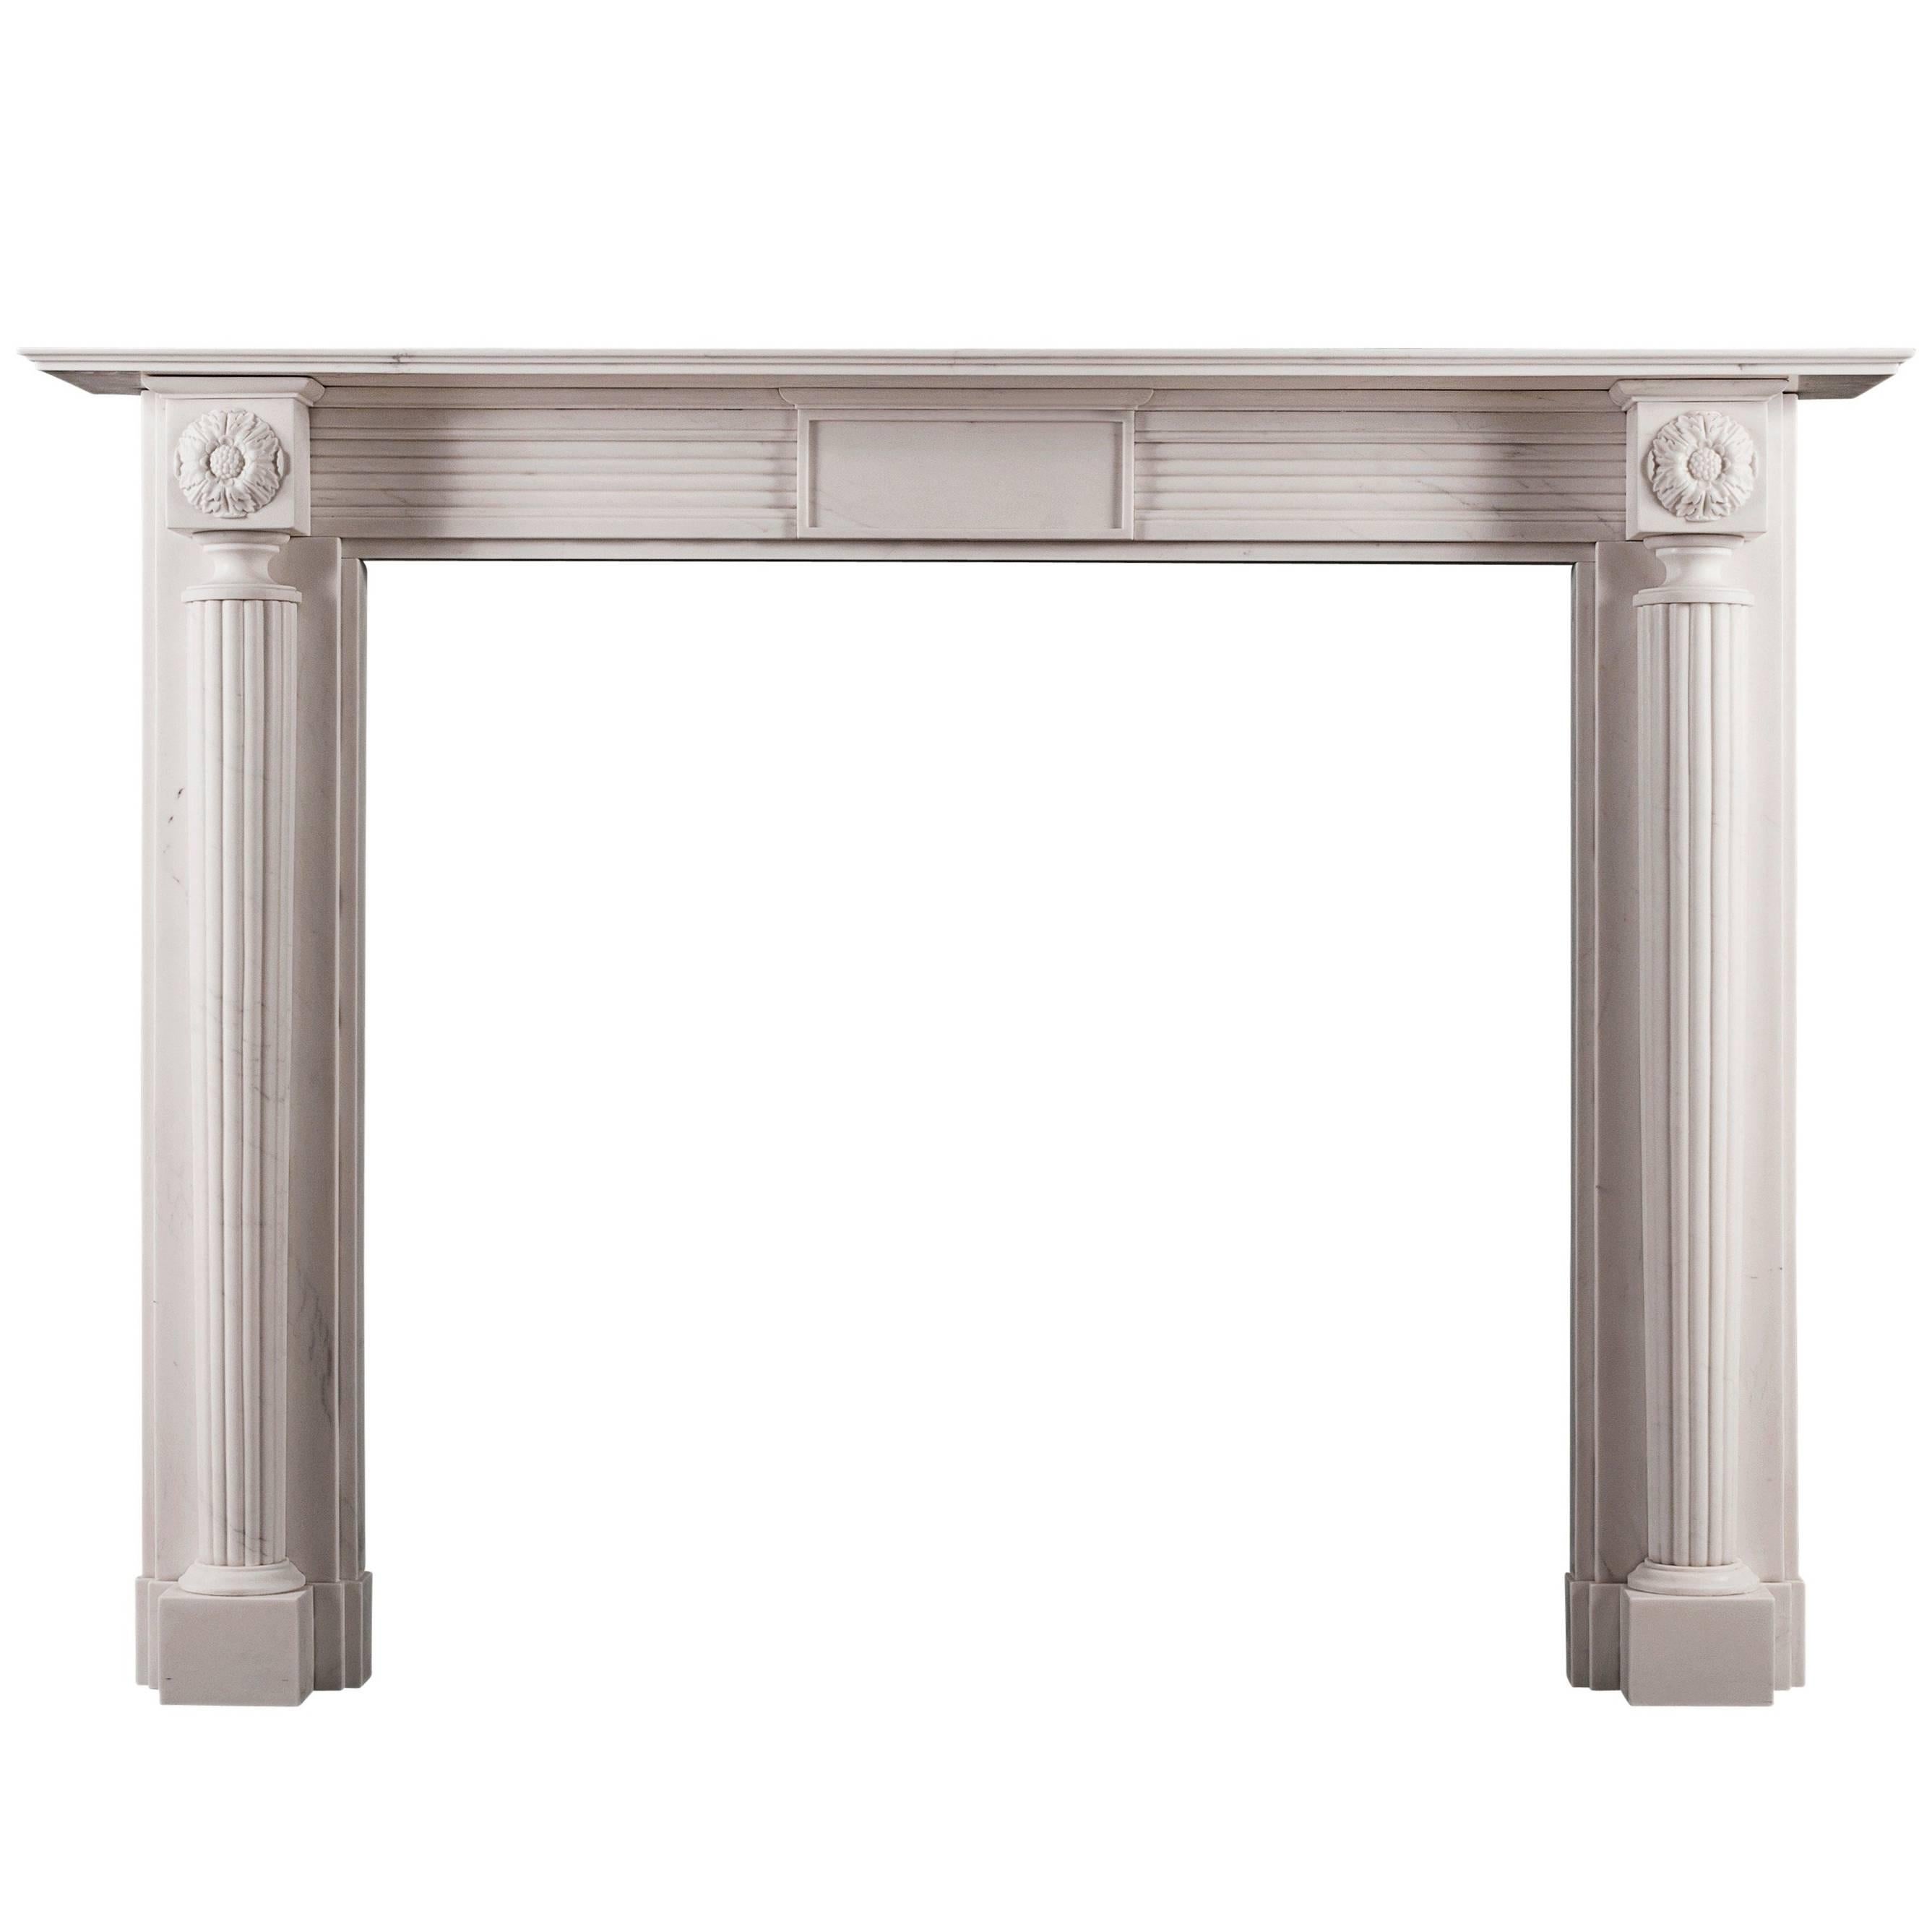 English Regency Style Fireplace in White Marble